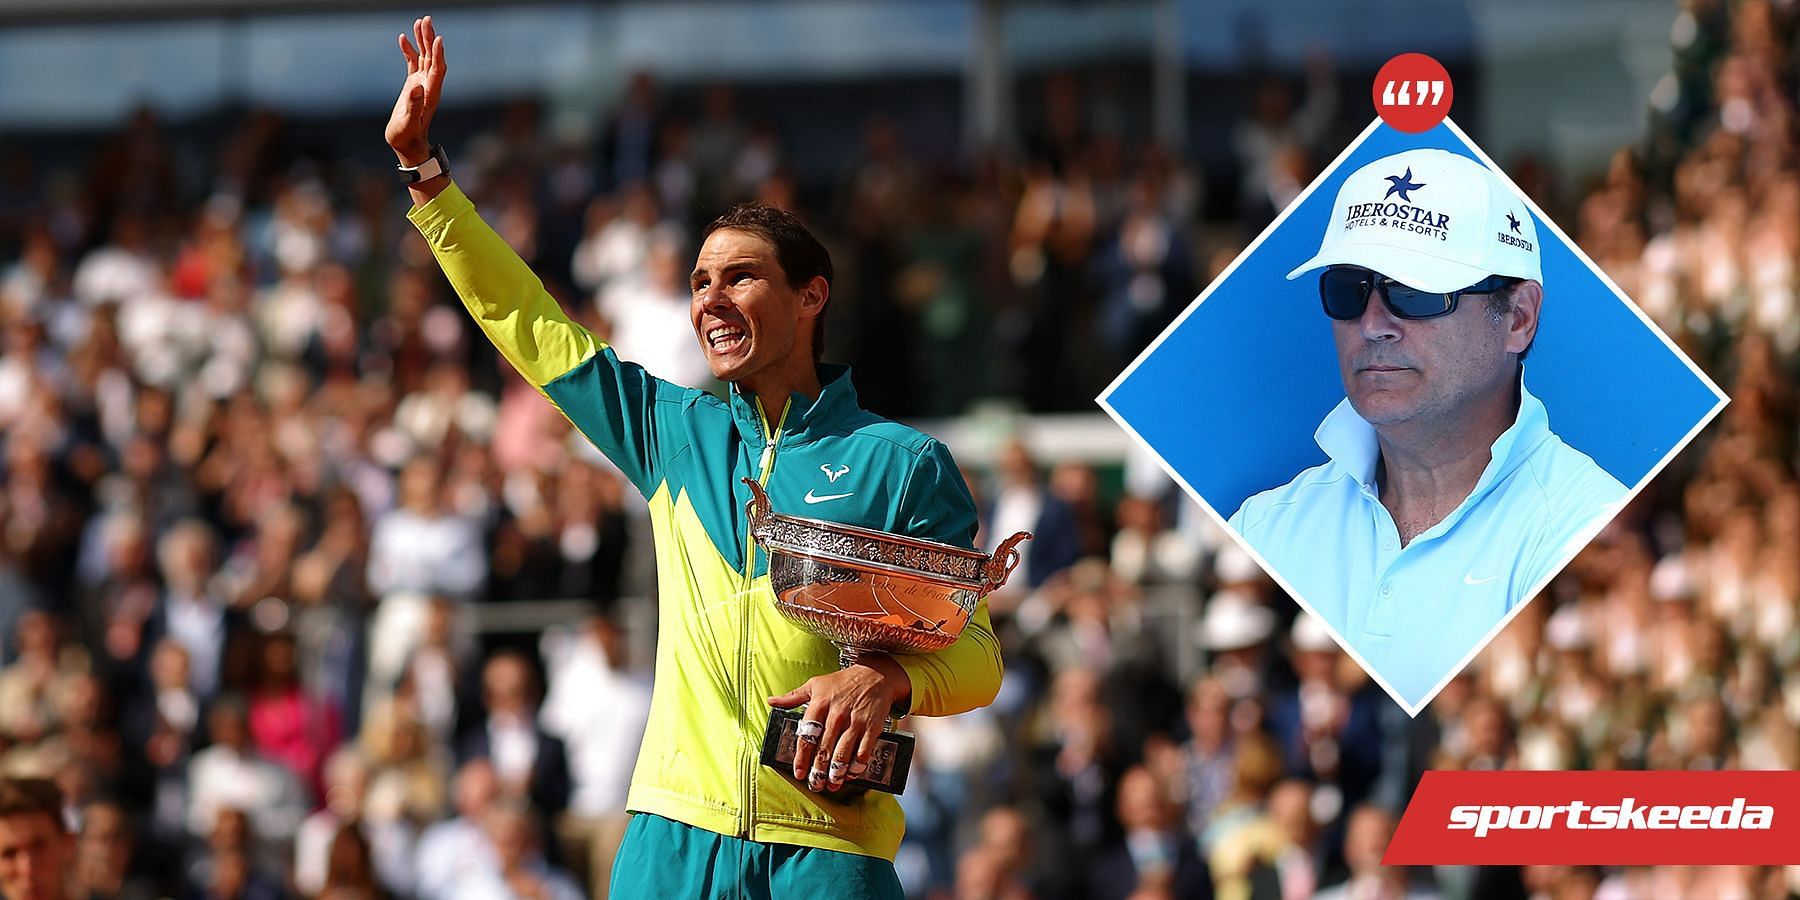 Rafael Nadal is one of a kind, according to his uncle Toni